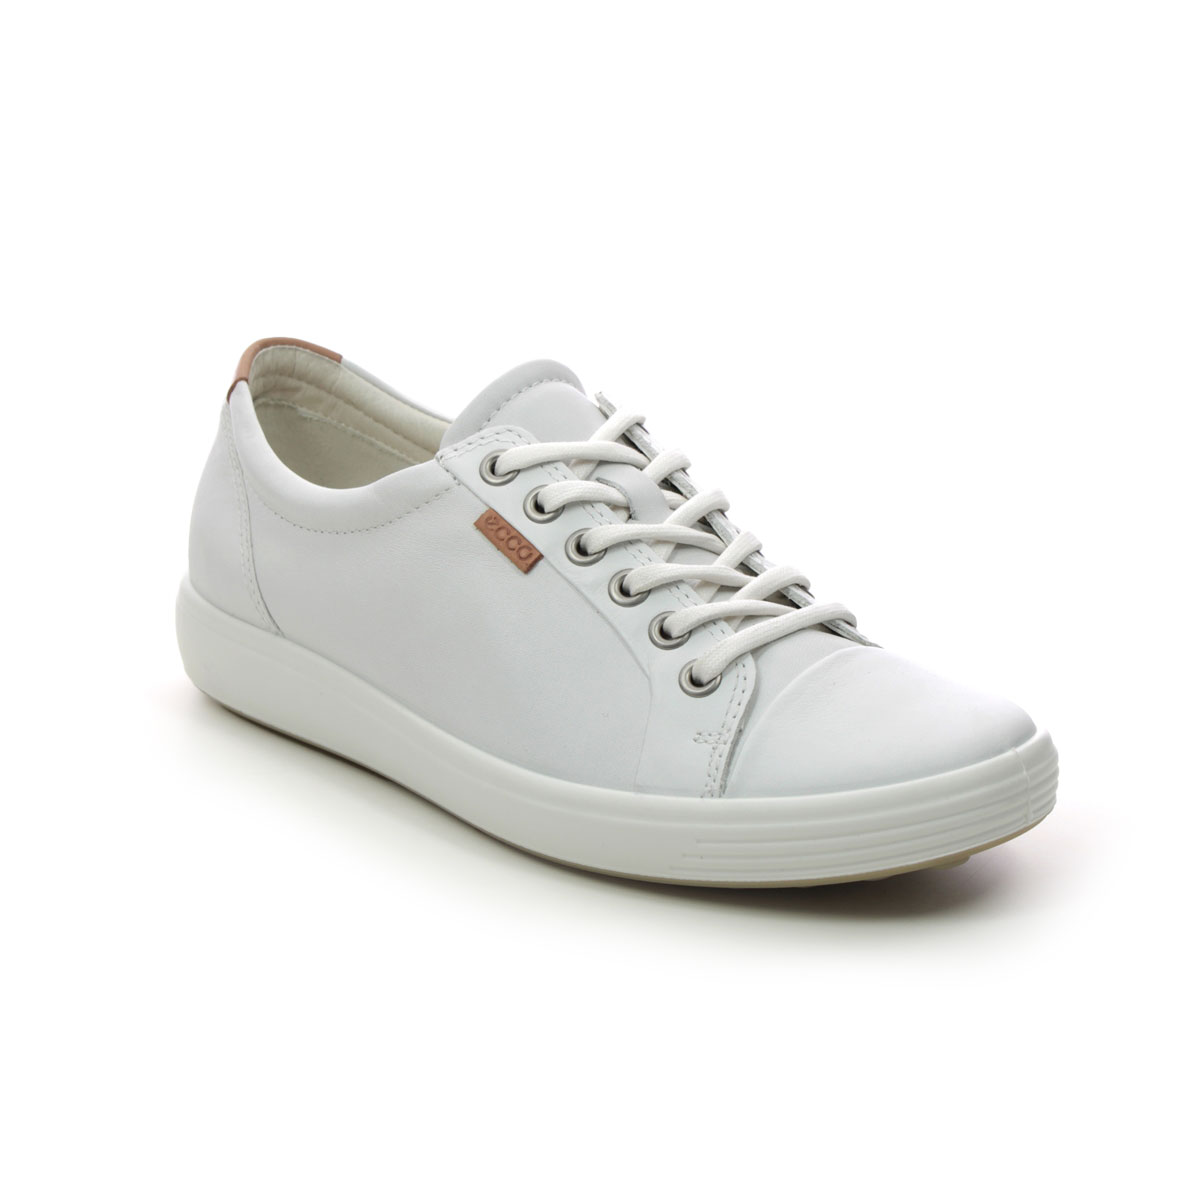 Ecco Soft 7 Lace White Leather Womens Trainers 430003-01007 In Size 39 In Plain White Leather